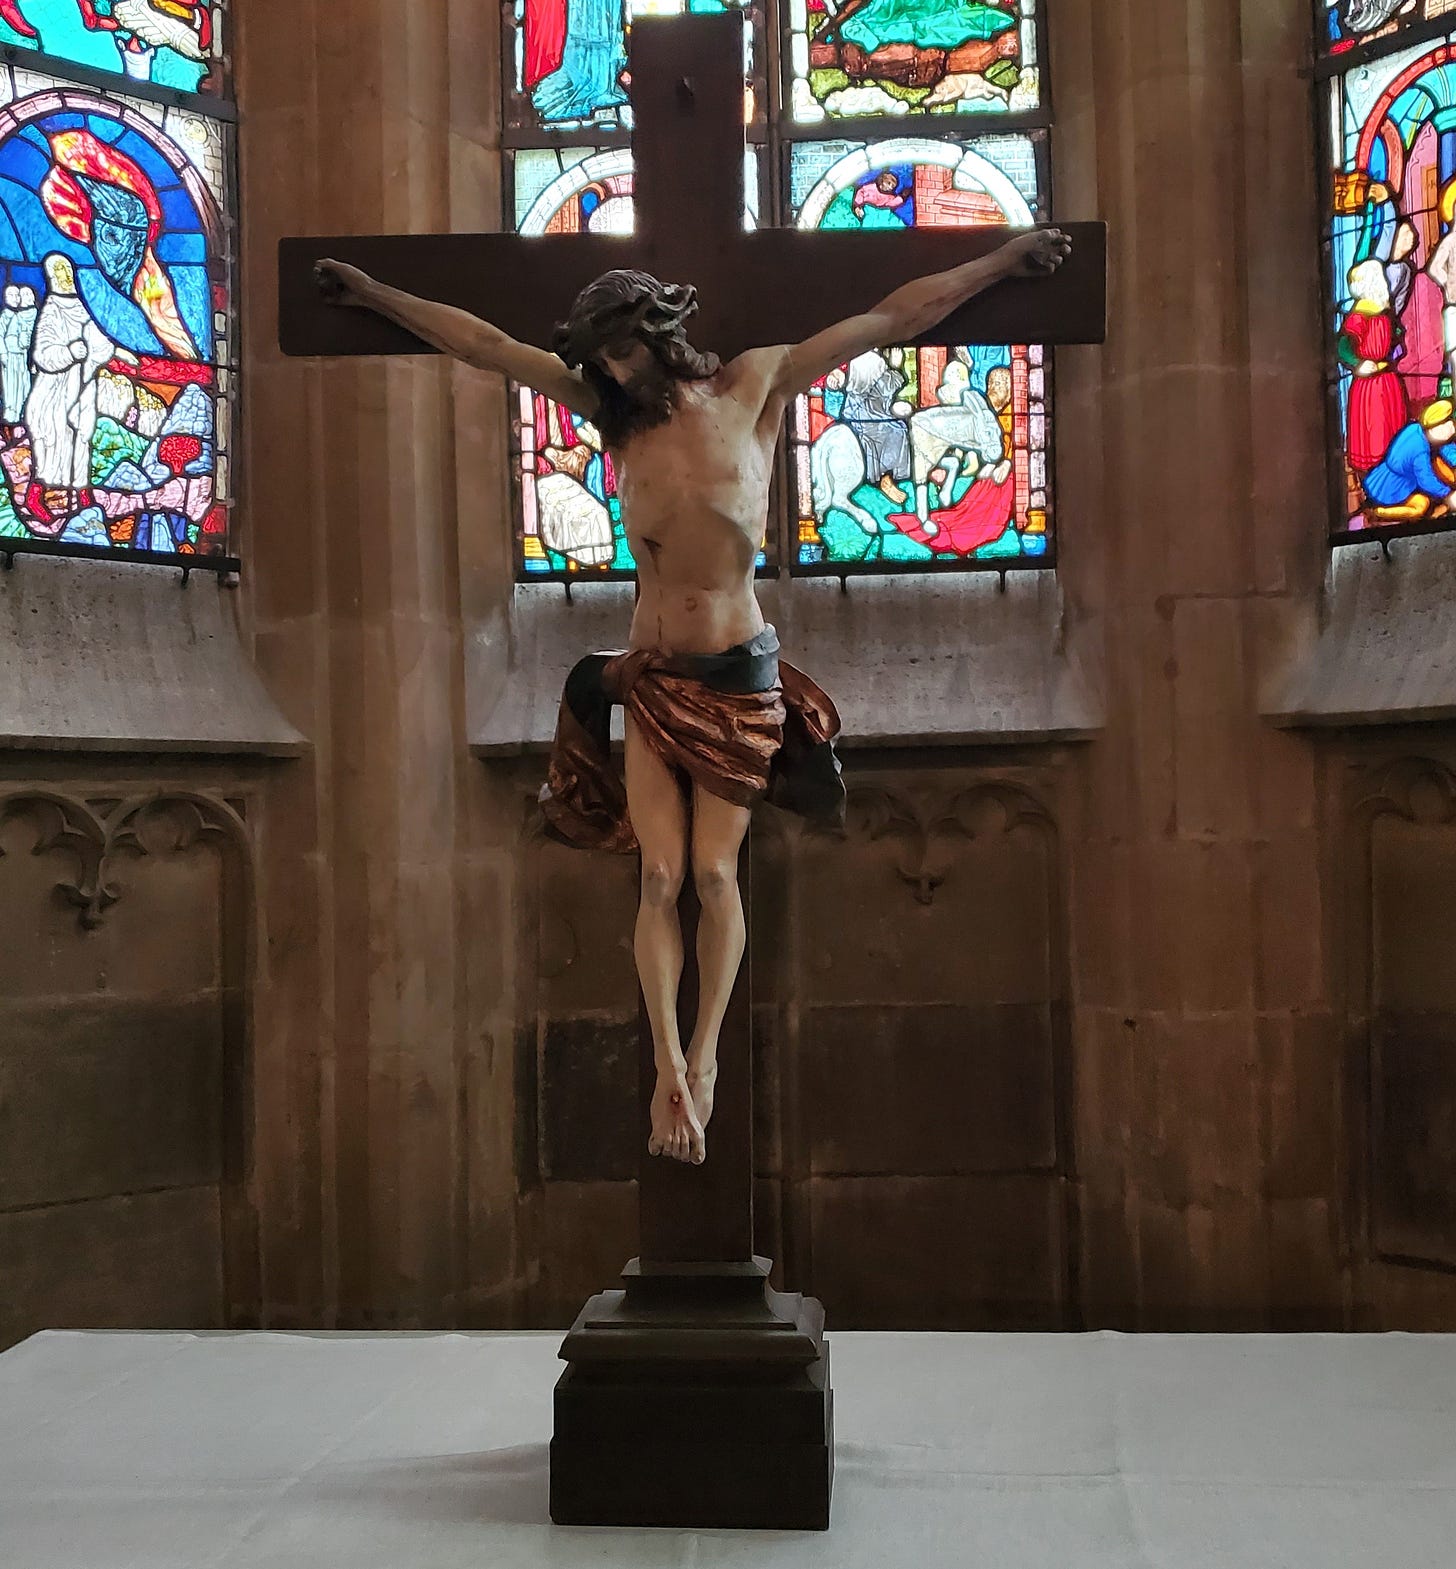 A not-very bloody crucifix in front of some stained glass windows.